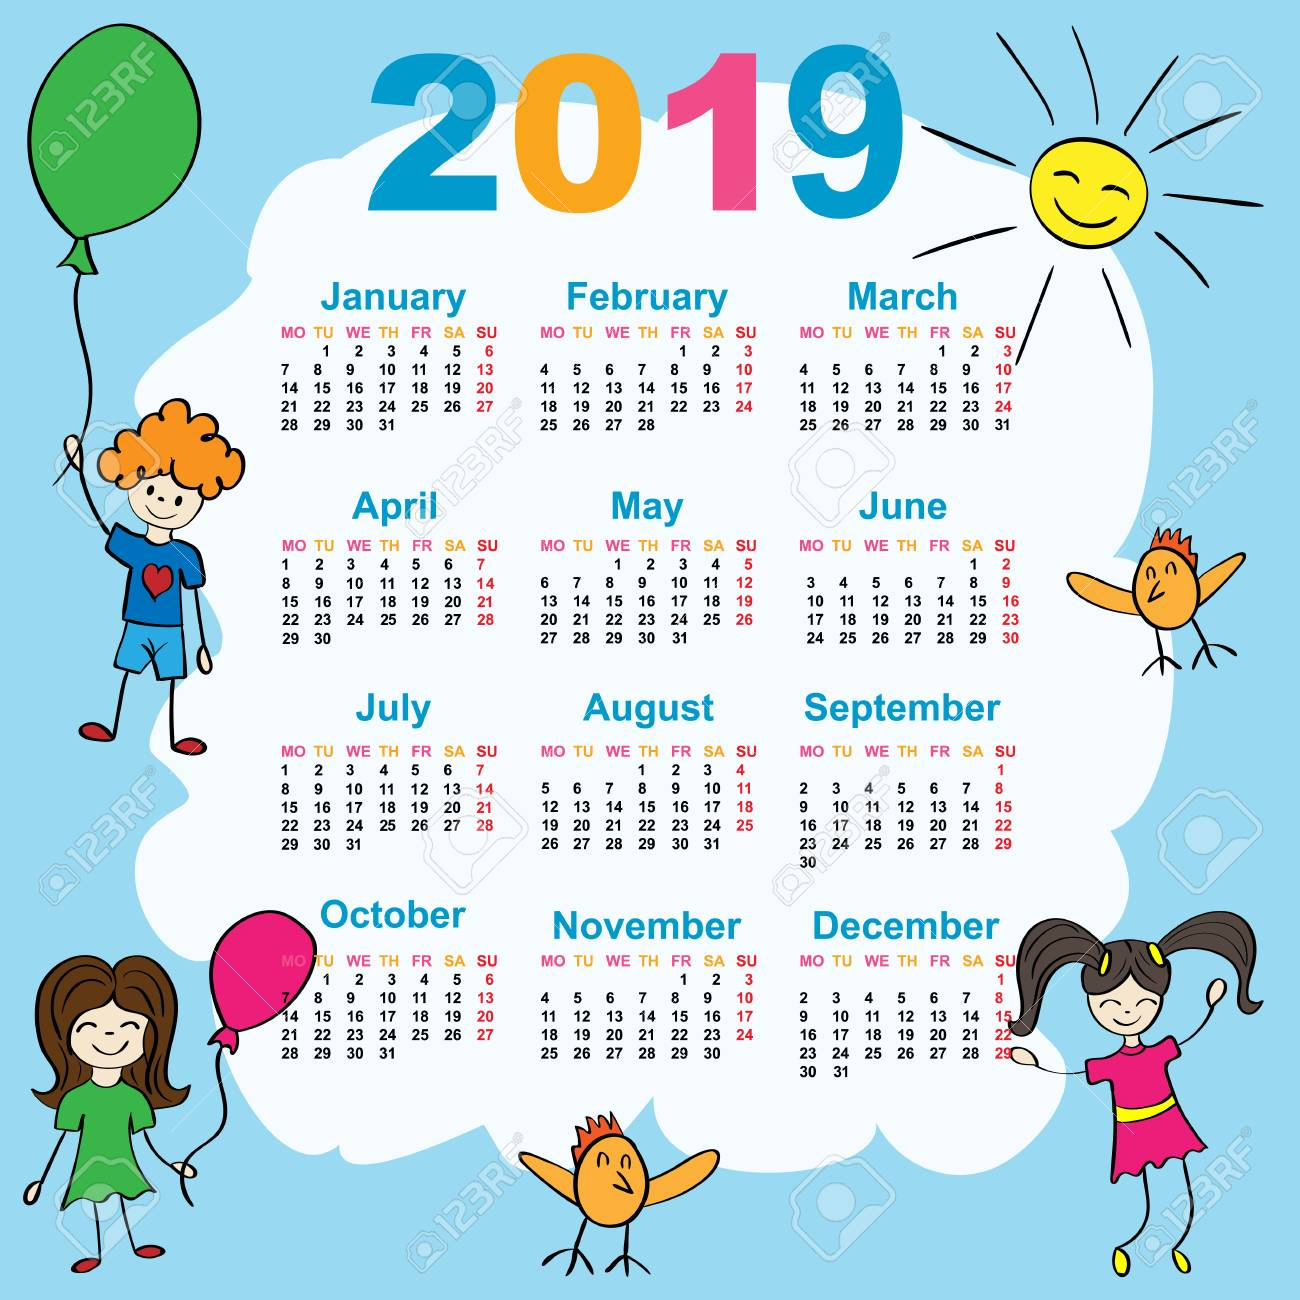 The Calendar. New Year. 2019. Date. For Your Design.